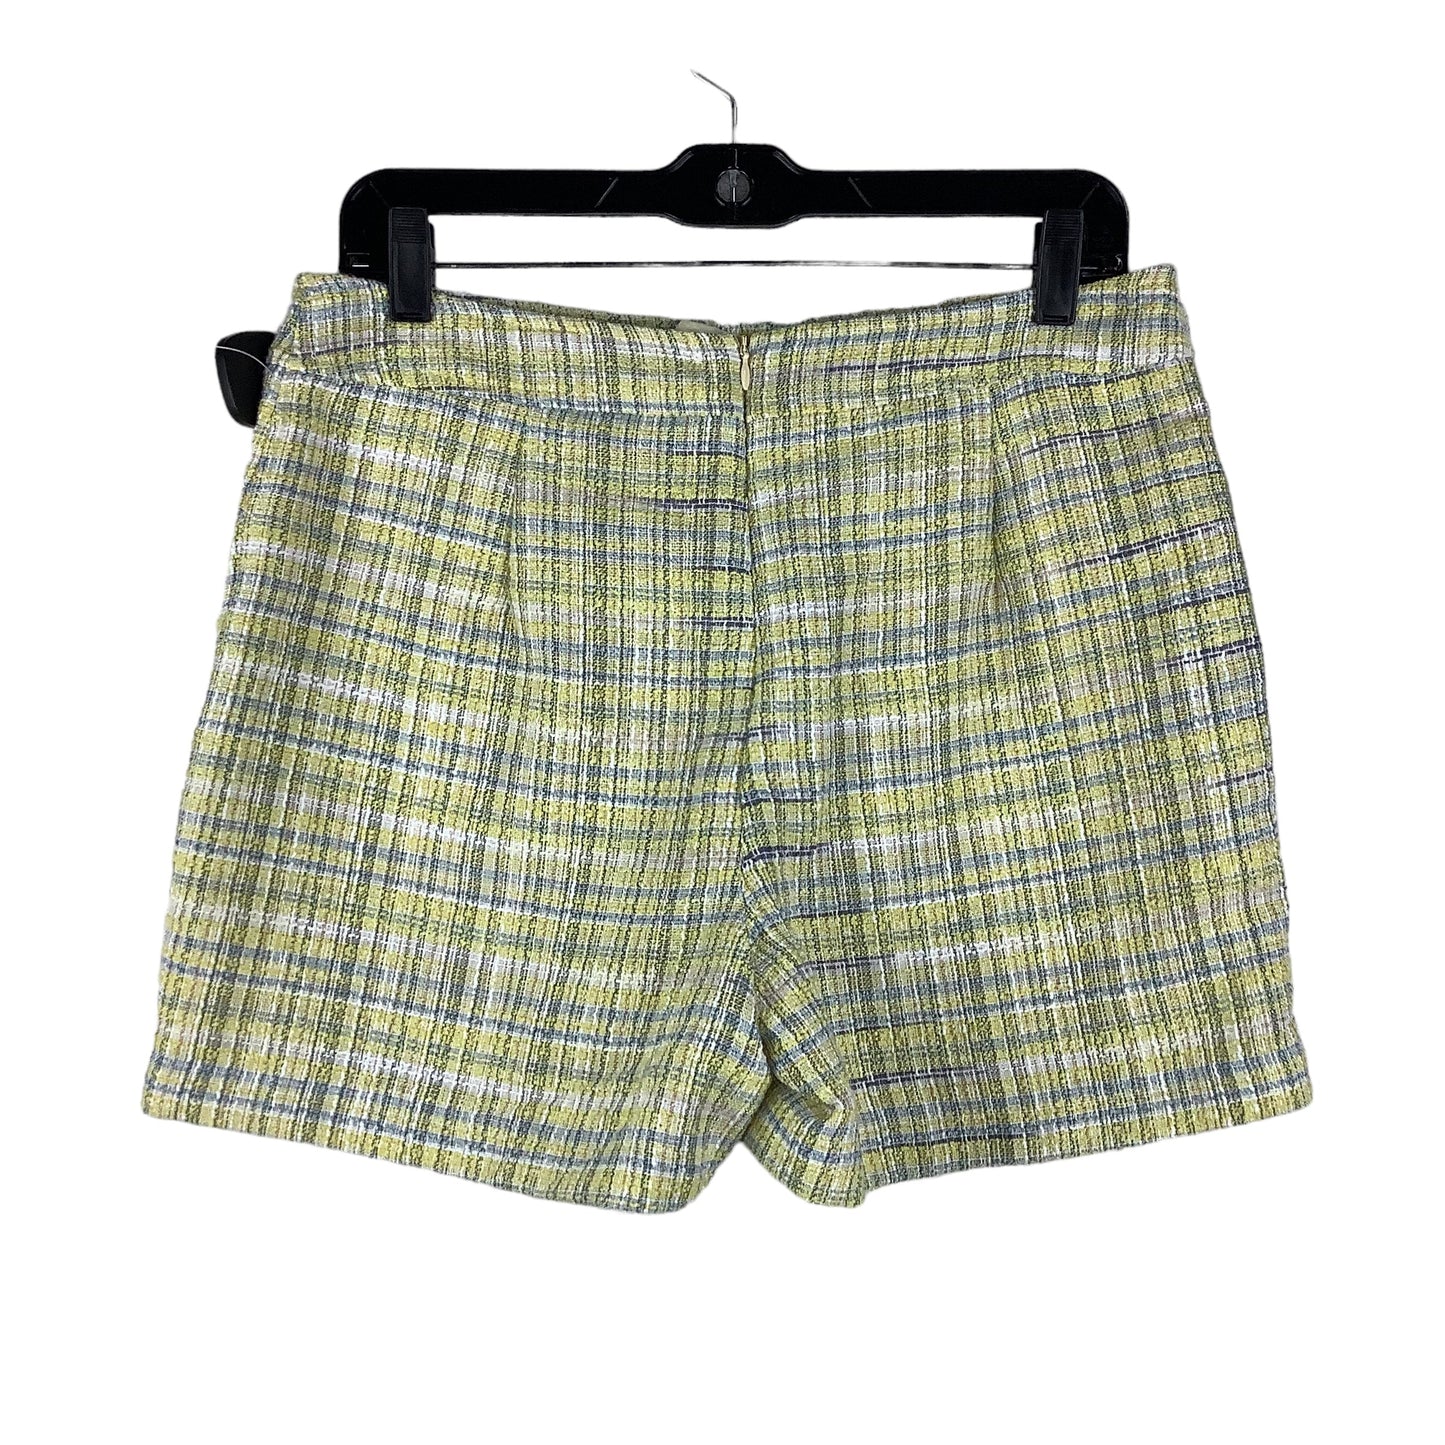 Yellow Shorts Clothes Mentor, Size S